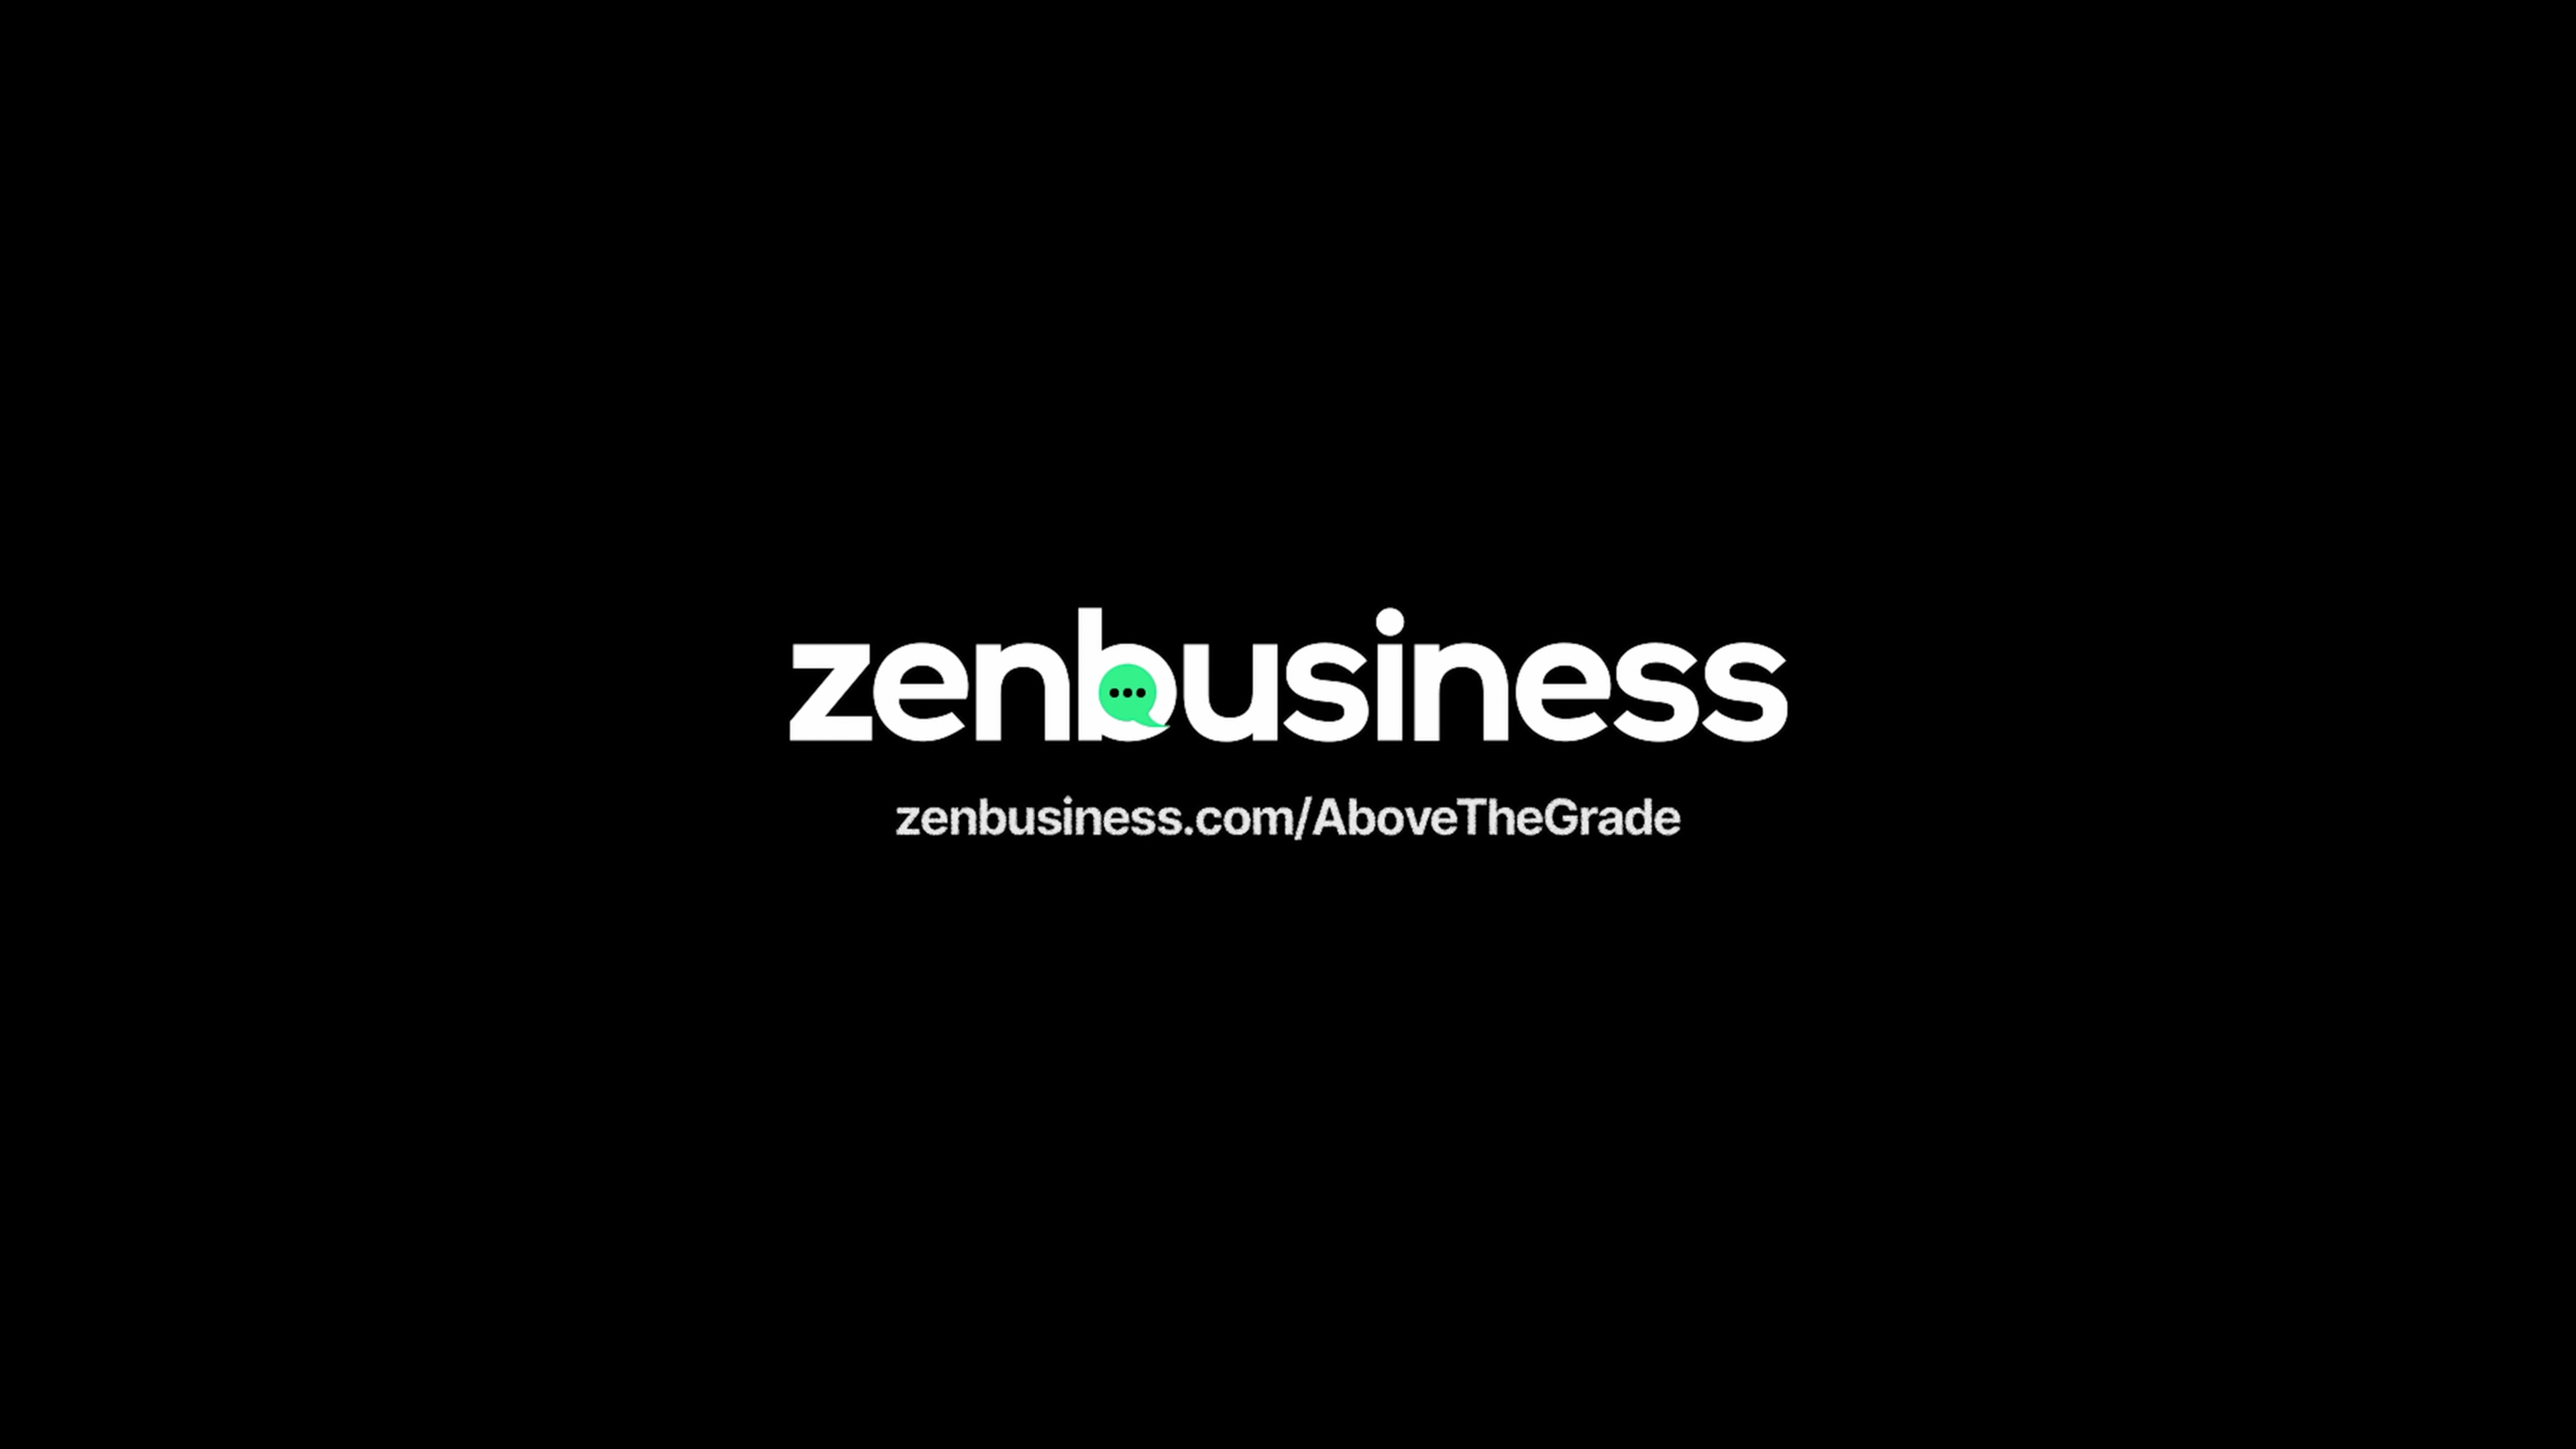 New research from ZenBusiness points to a profound convergence between entrepreneurship and neurodiversity among the Class of 2023. In a U.S. survey of over 1000 adults aged 18-25, a resounding 80 percent believe Gen Z is on track to become the most entrepreneurial generation in U.S. history, with a staggering 92 percent recognizing the value of neurodiversity as a superpower in driving entrepreneurship. With caps and gowns donned, the leaders of tomorrow are not just stepping into the world; they're ready to change it, and ZenBusiness will be here to help with 2,023 free LLCs and coaching opportunities.